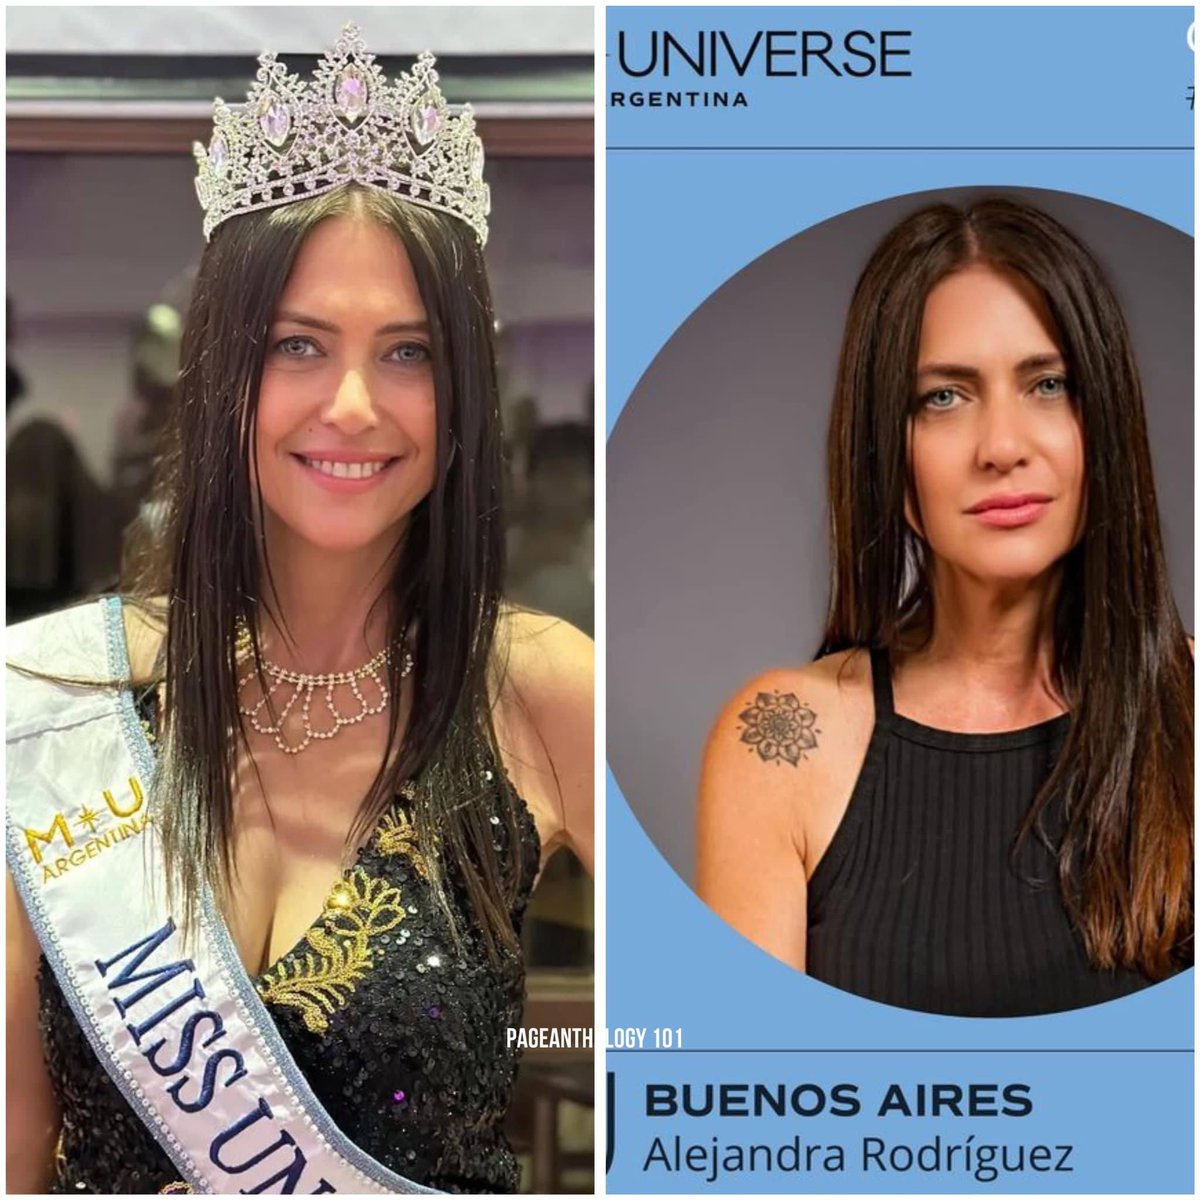 𝗔𝗚𝗘𝗟𝗘𝗦𝗦 𝗕𝗘𝗔𝗨𝗧𝗬 • Meet the 60-year-old lawyer and journalist vying for Miss Universe Argentina 2024 Alejandra Marisa Rodriguez was crowned MU Buenos Aires and will represent Argentina’s capital city Buenos Aires at the Miss Universe Argentina this year.